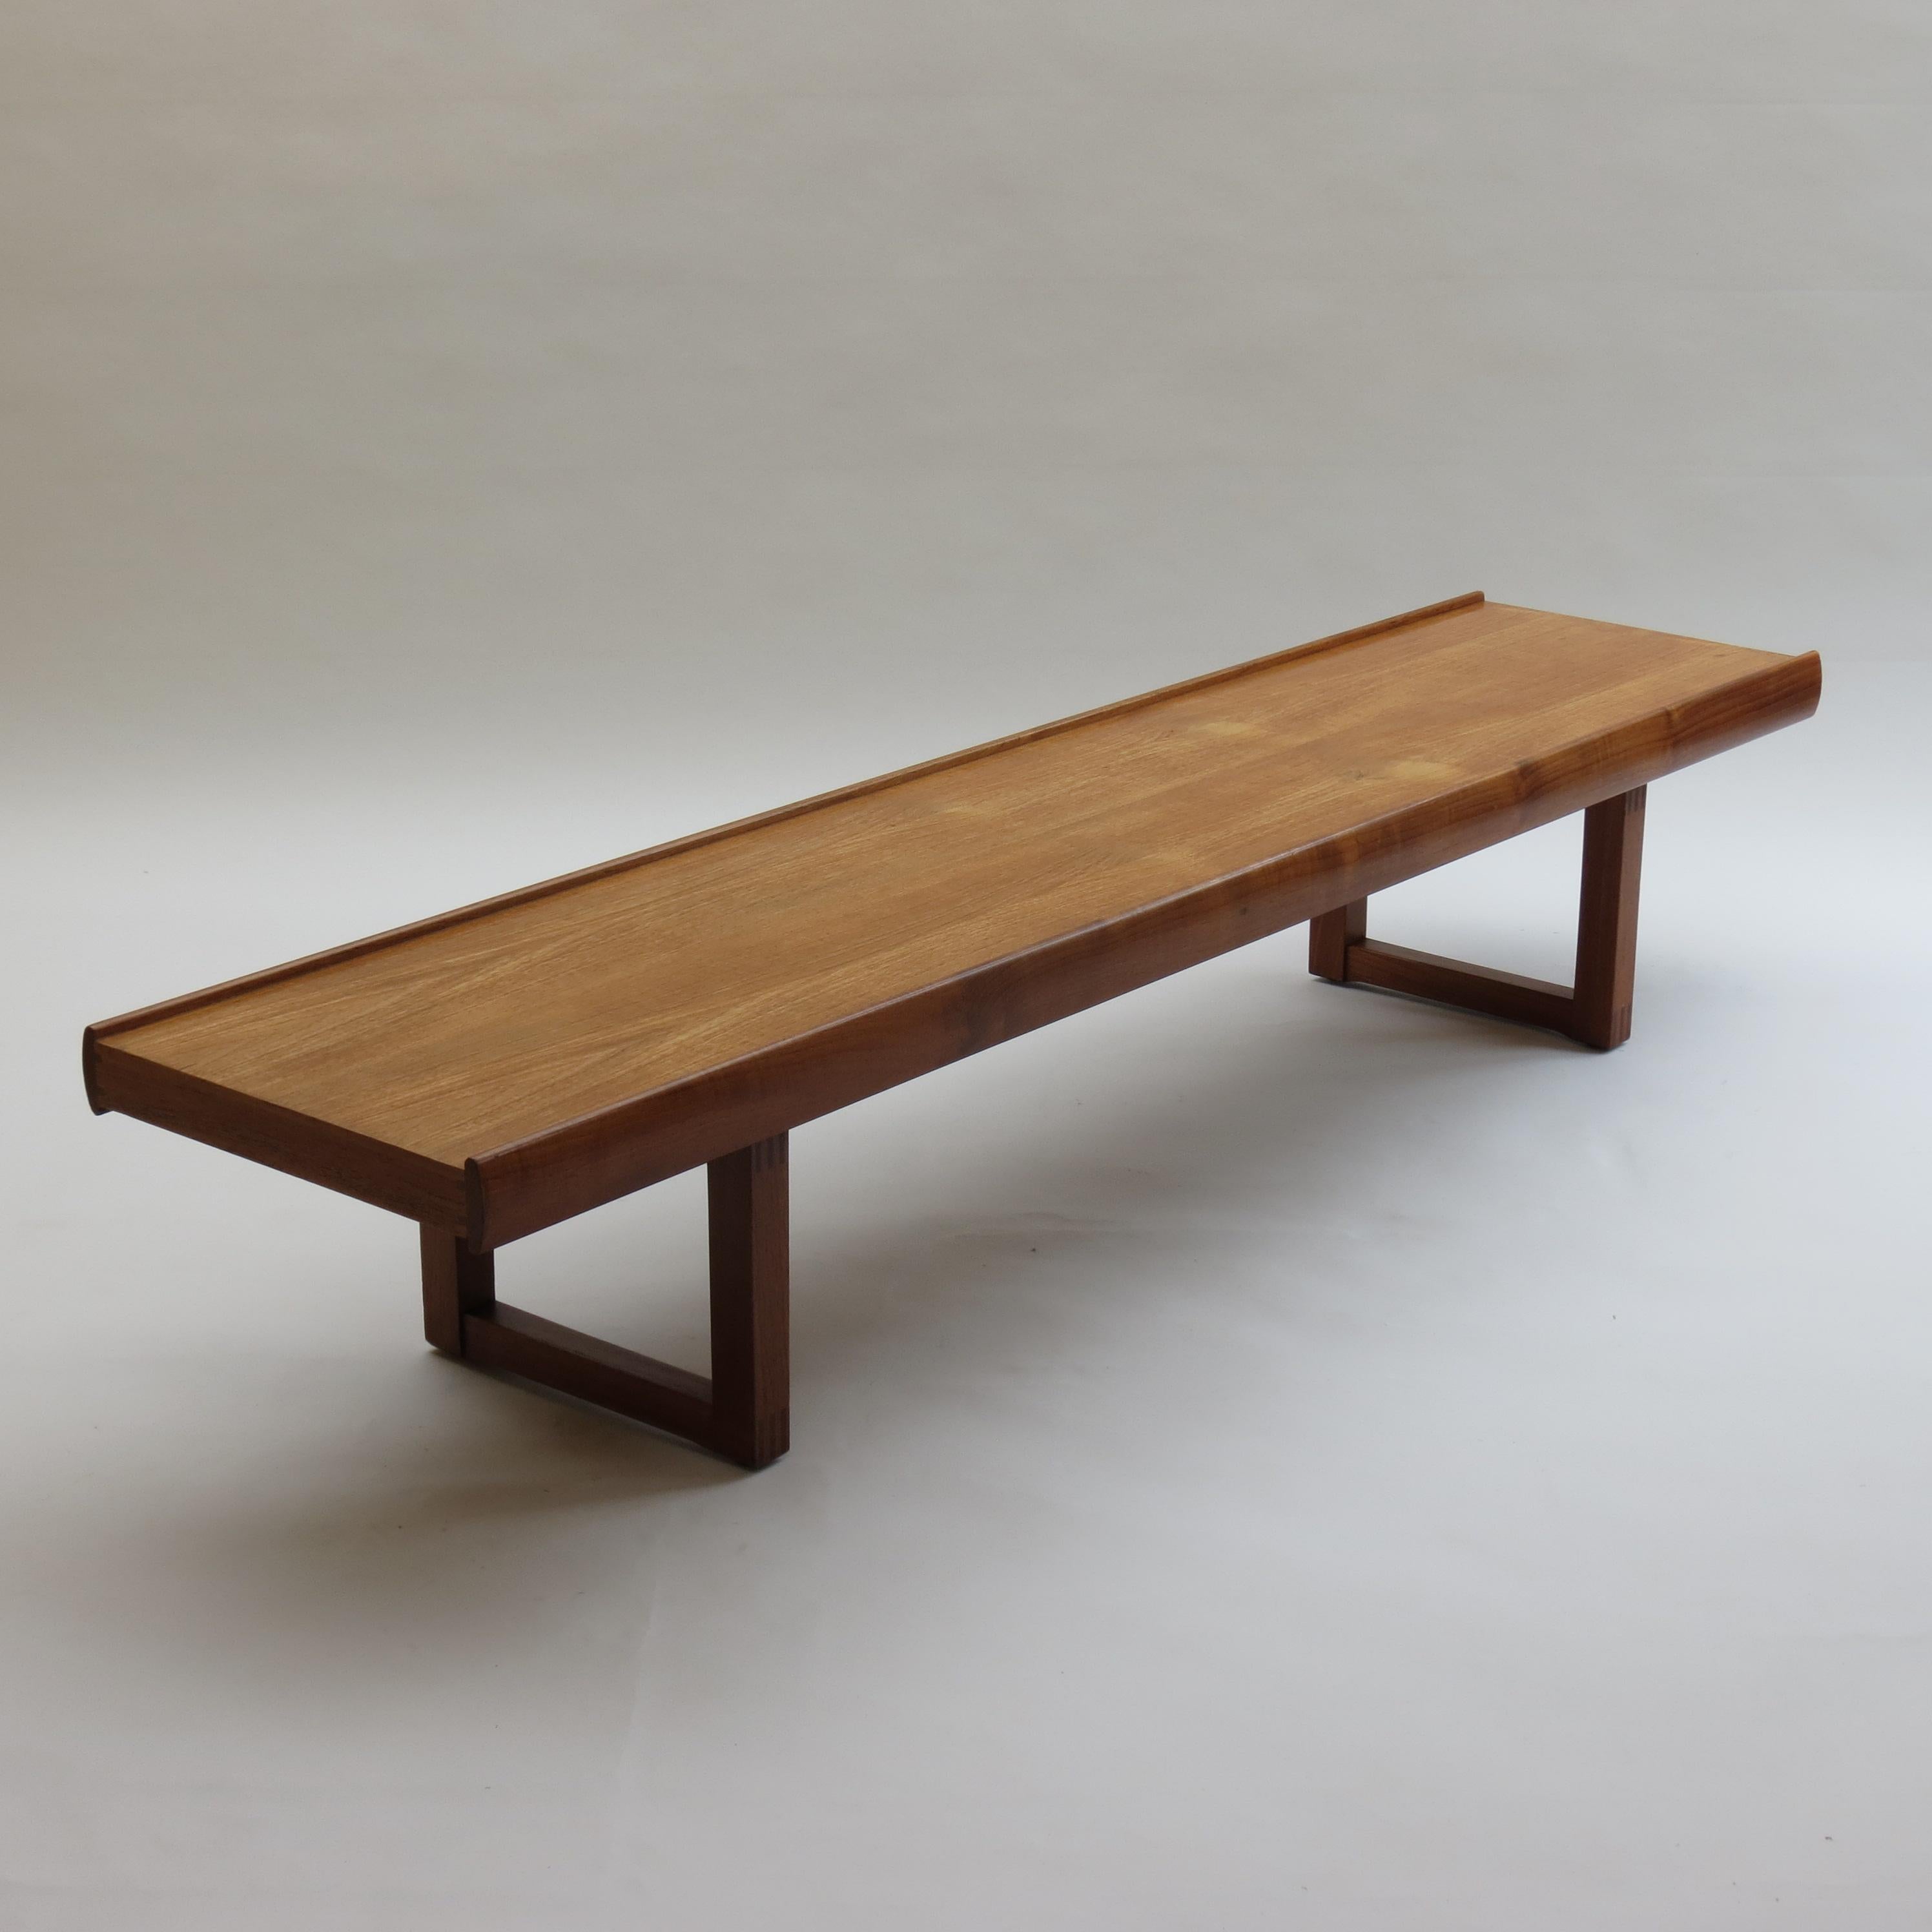 20th Century 1960s Teak Long Coffee Table / Bench by Dalescraft UK 